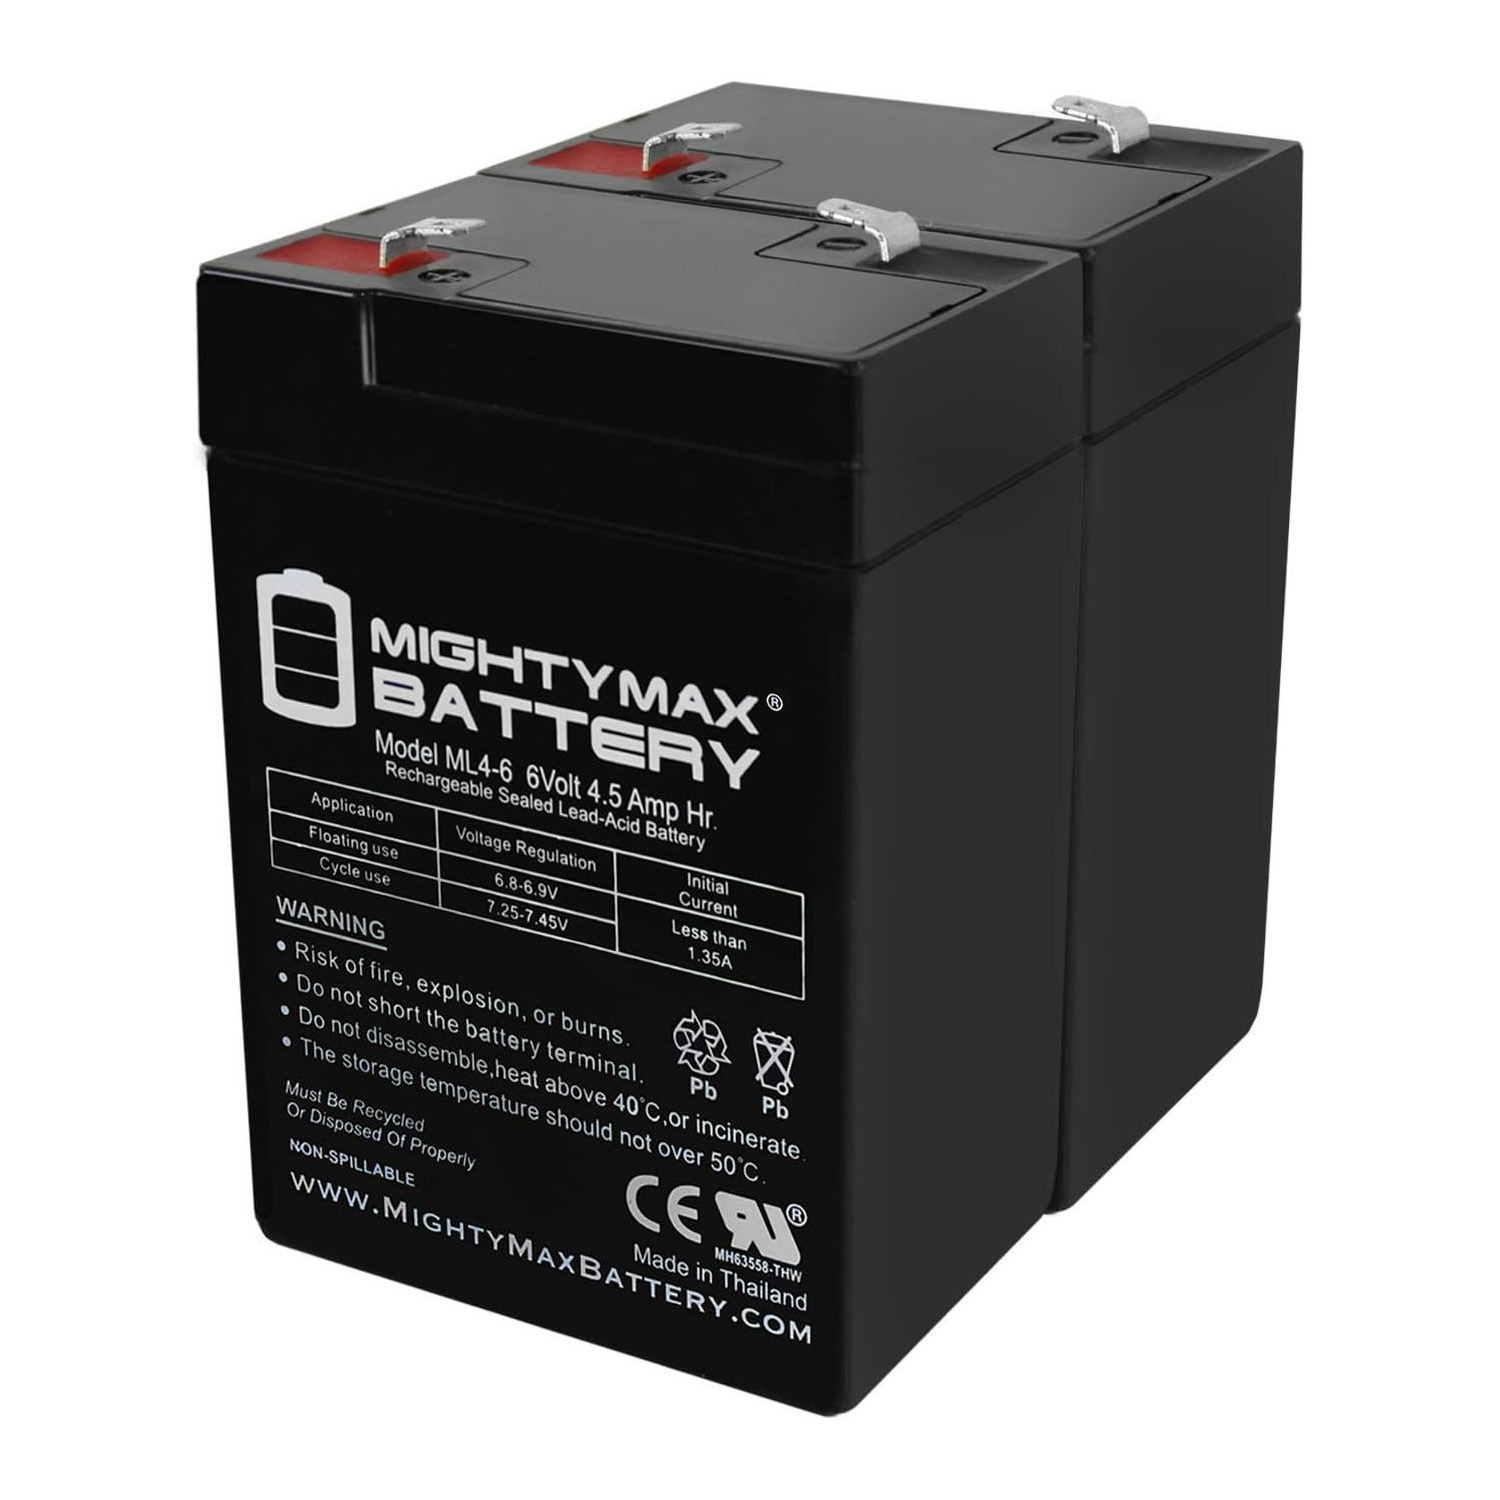 6V 4.5AH Replacement Battery for Sentry Lite SCR-525-11 - 2 Pack